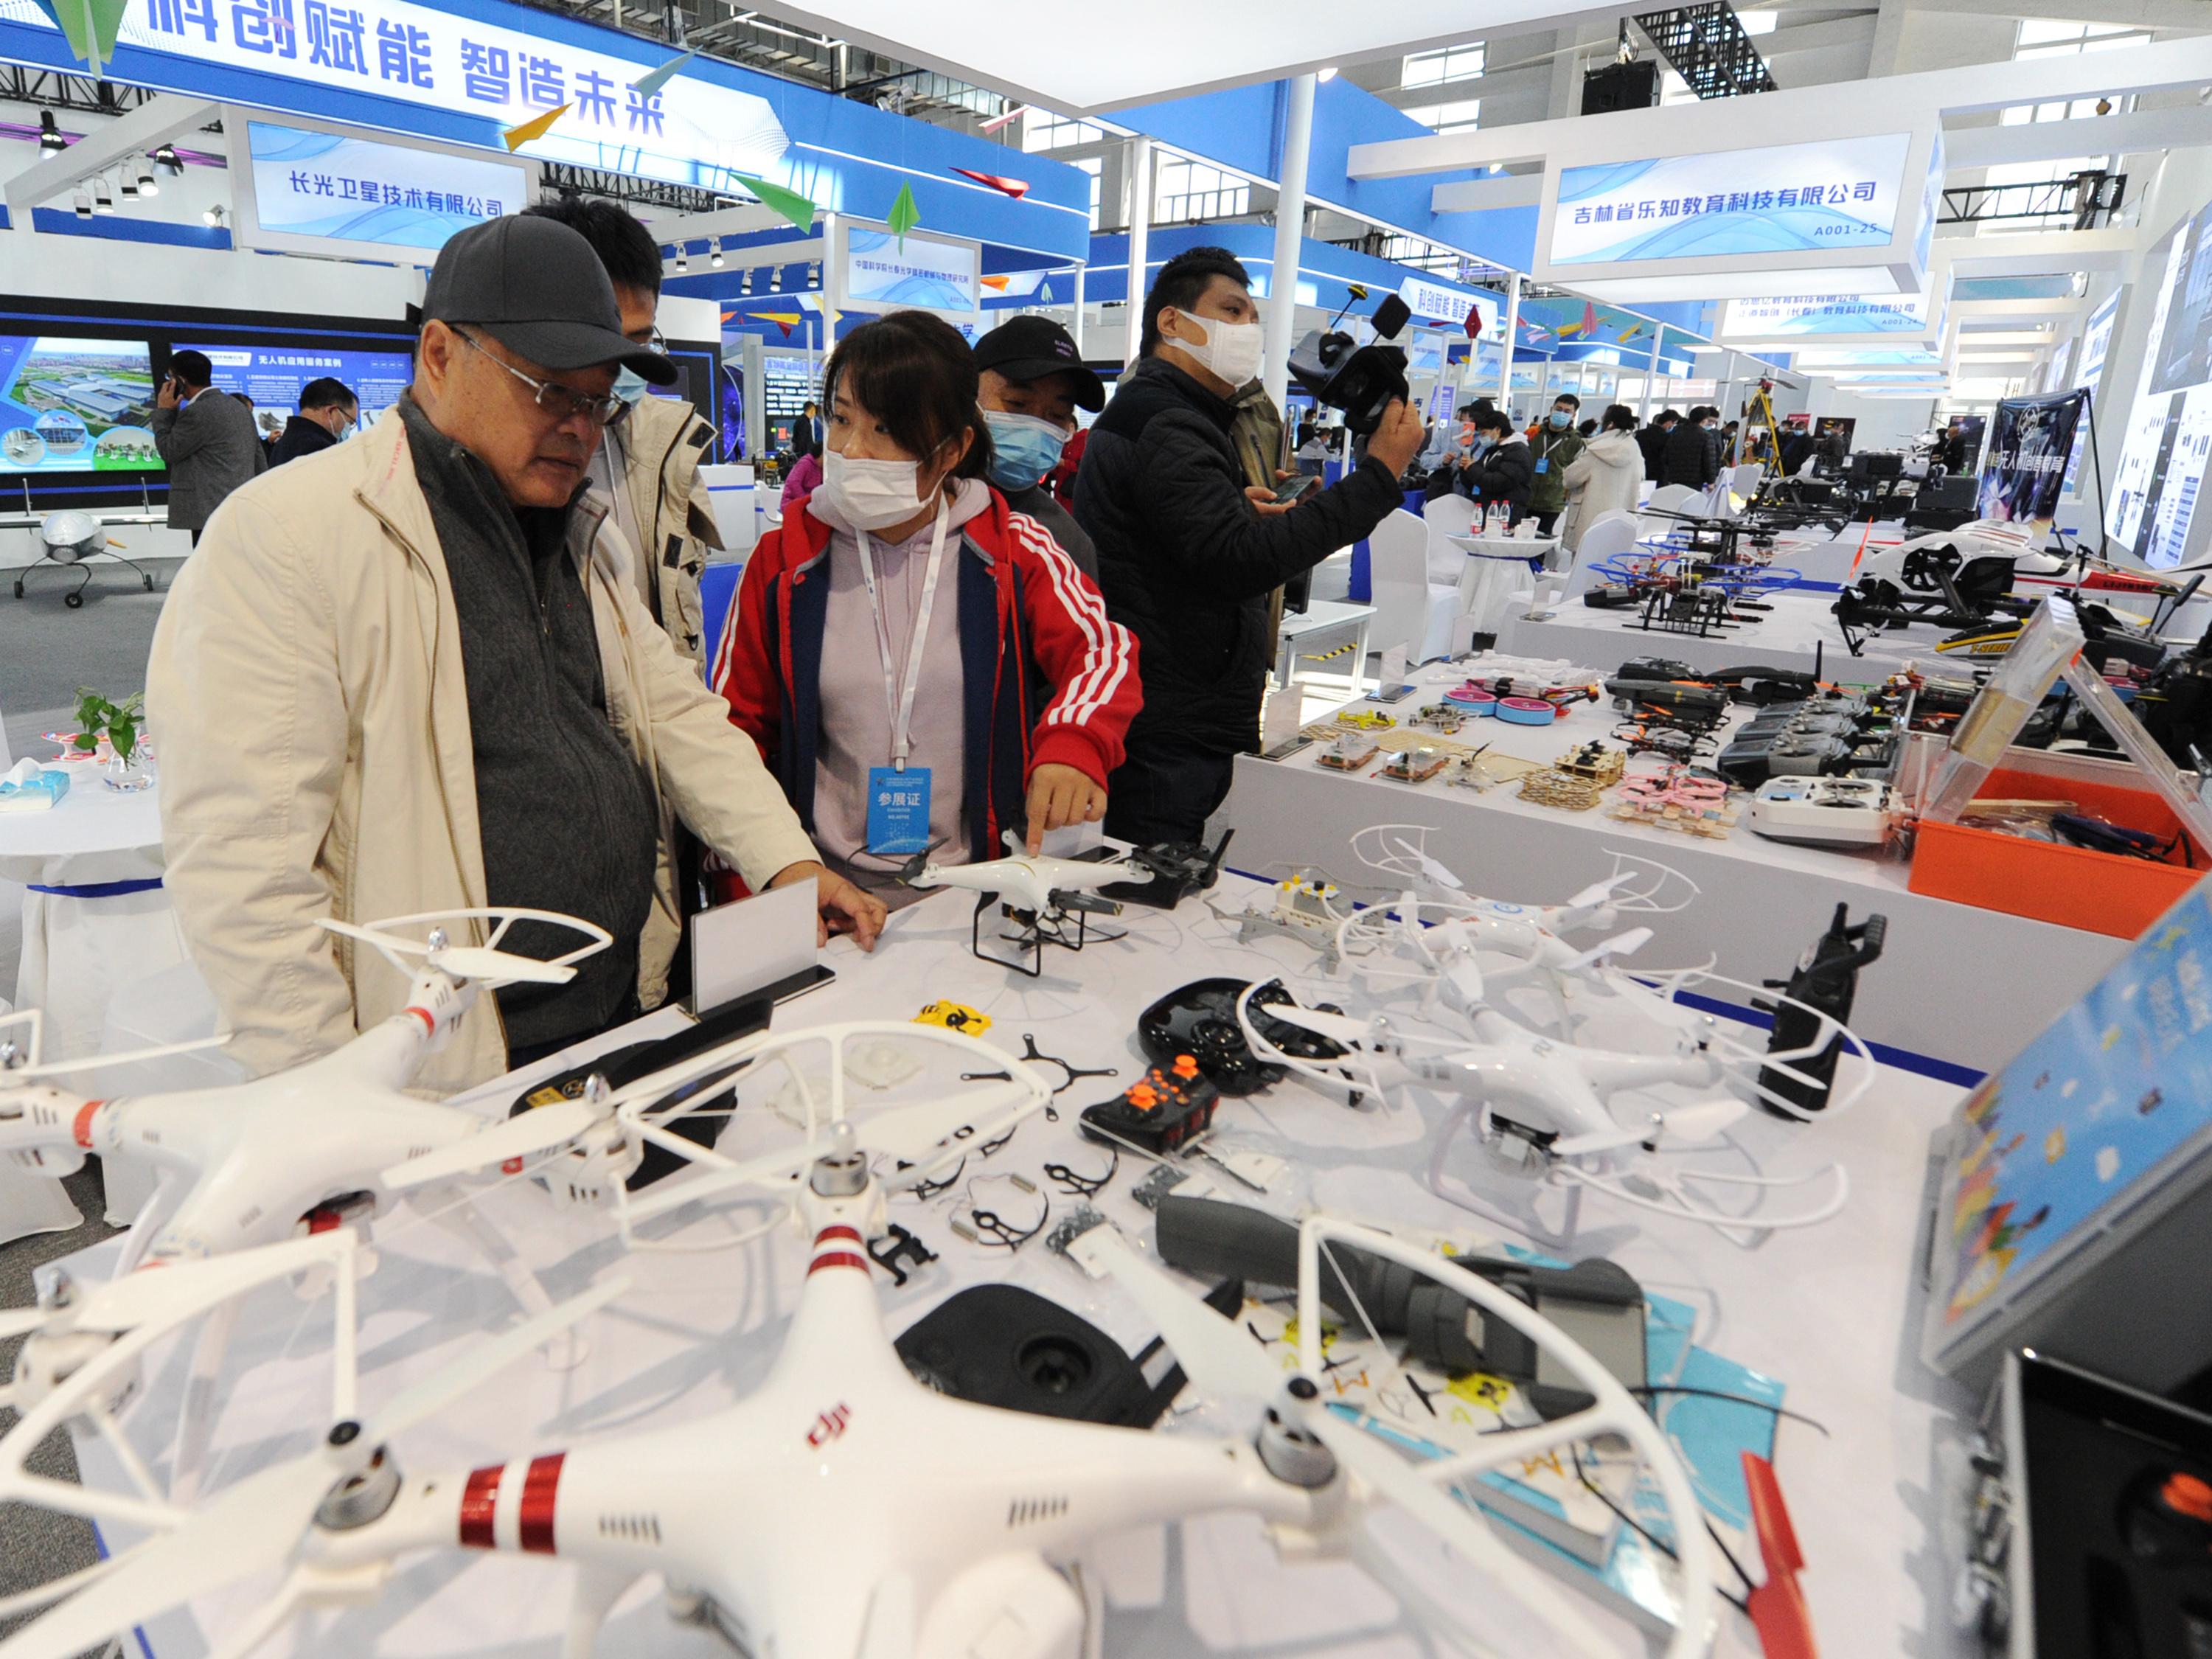 People look at drones at the DJI stand during the 2020 Changchun International UAV Industry Expo at CCIAFF Expo park on October 16, 2020 in Changchun, Jilin Province of China. (Liu Dong—China News Service/Getty)